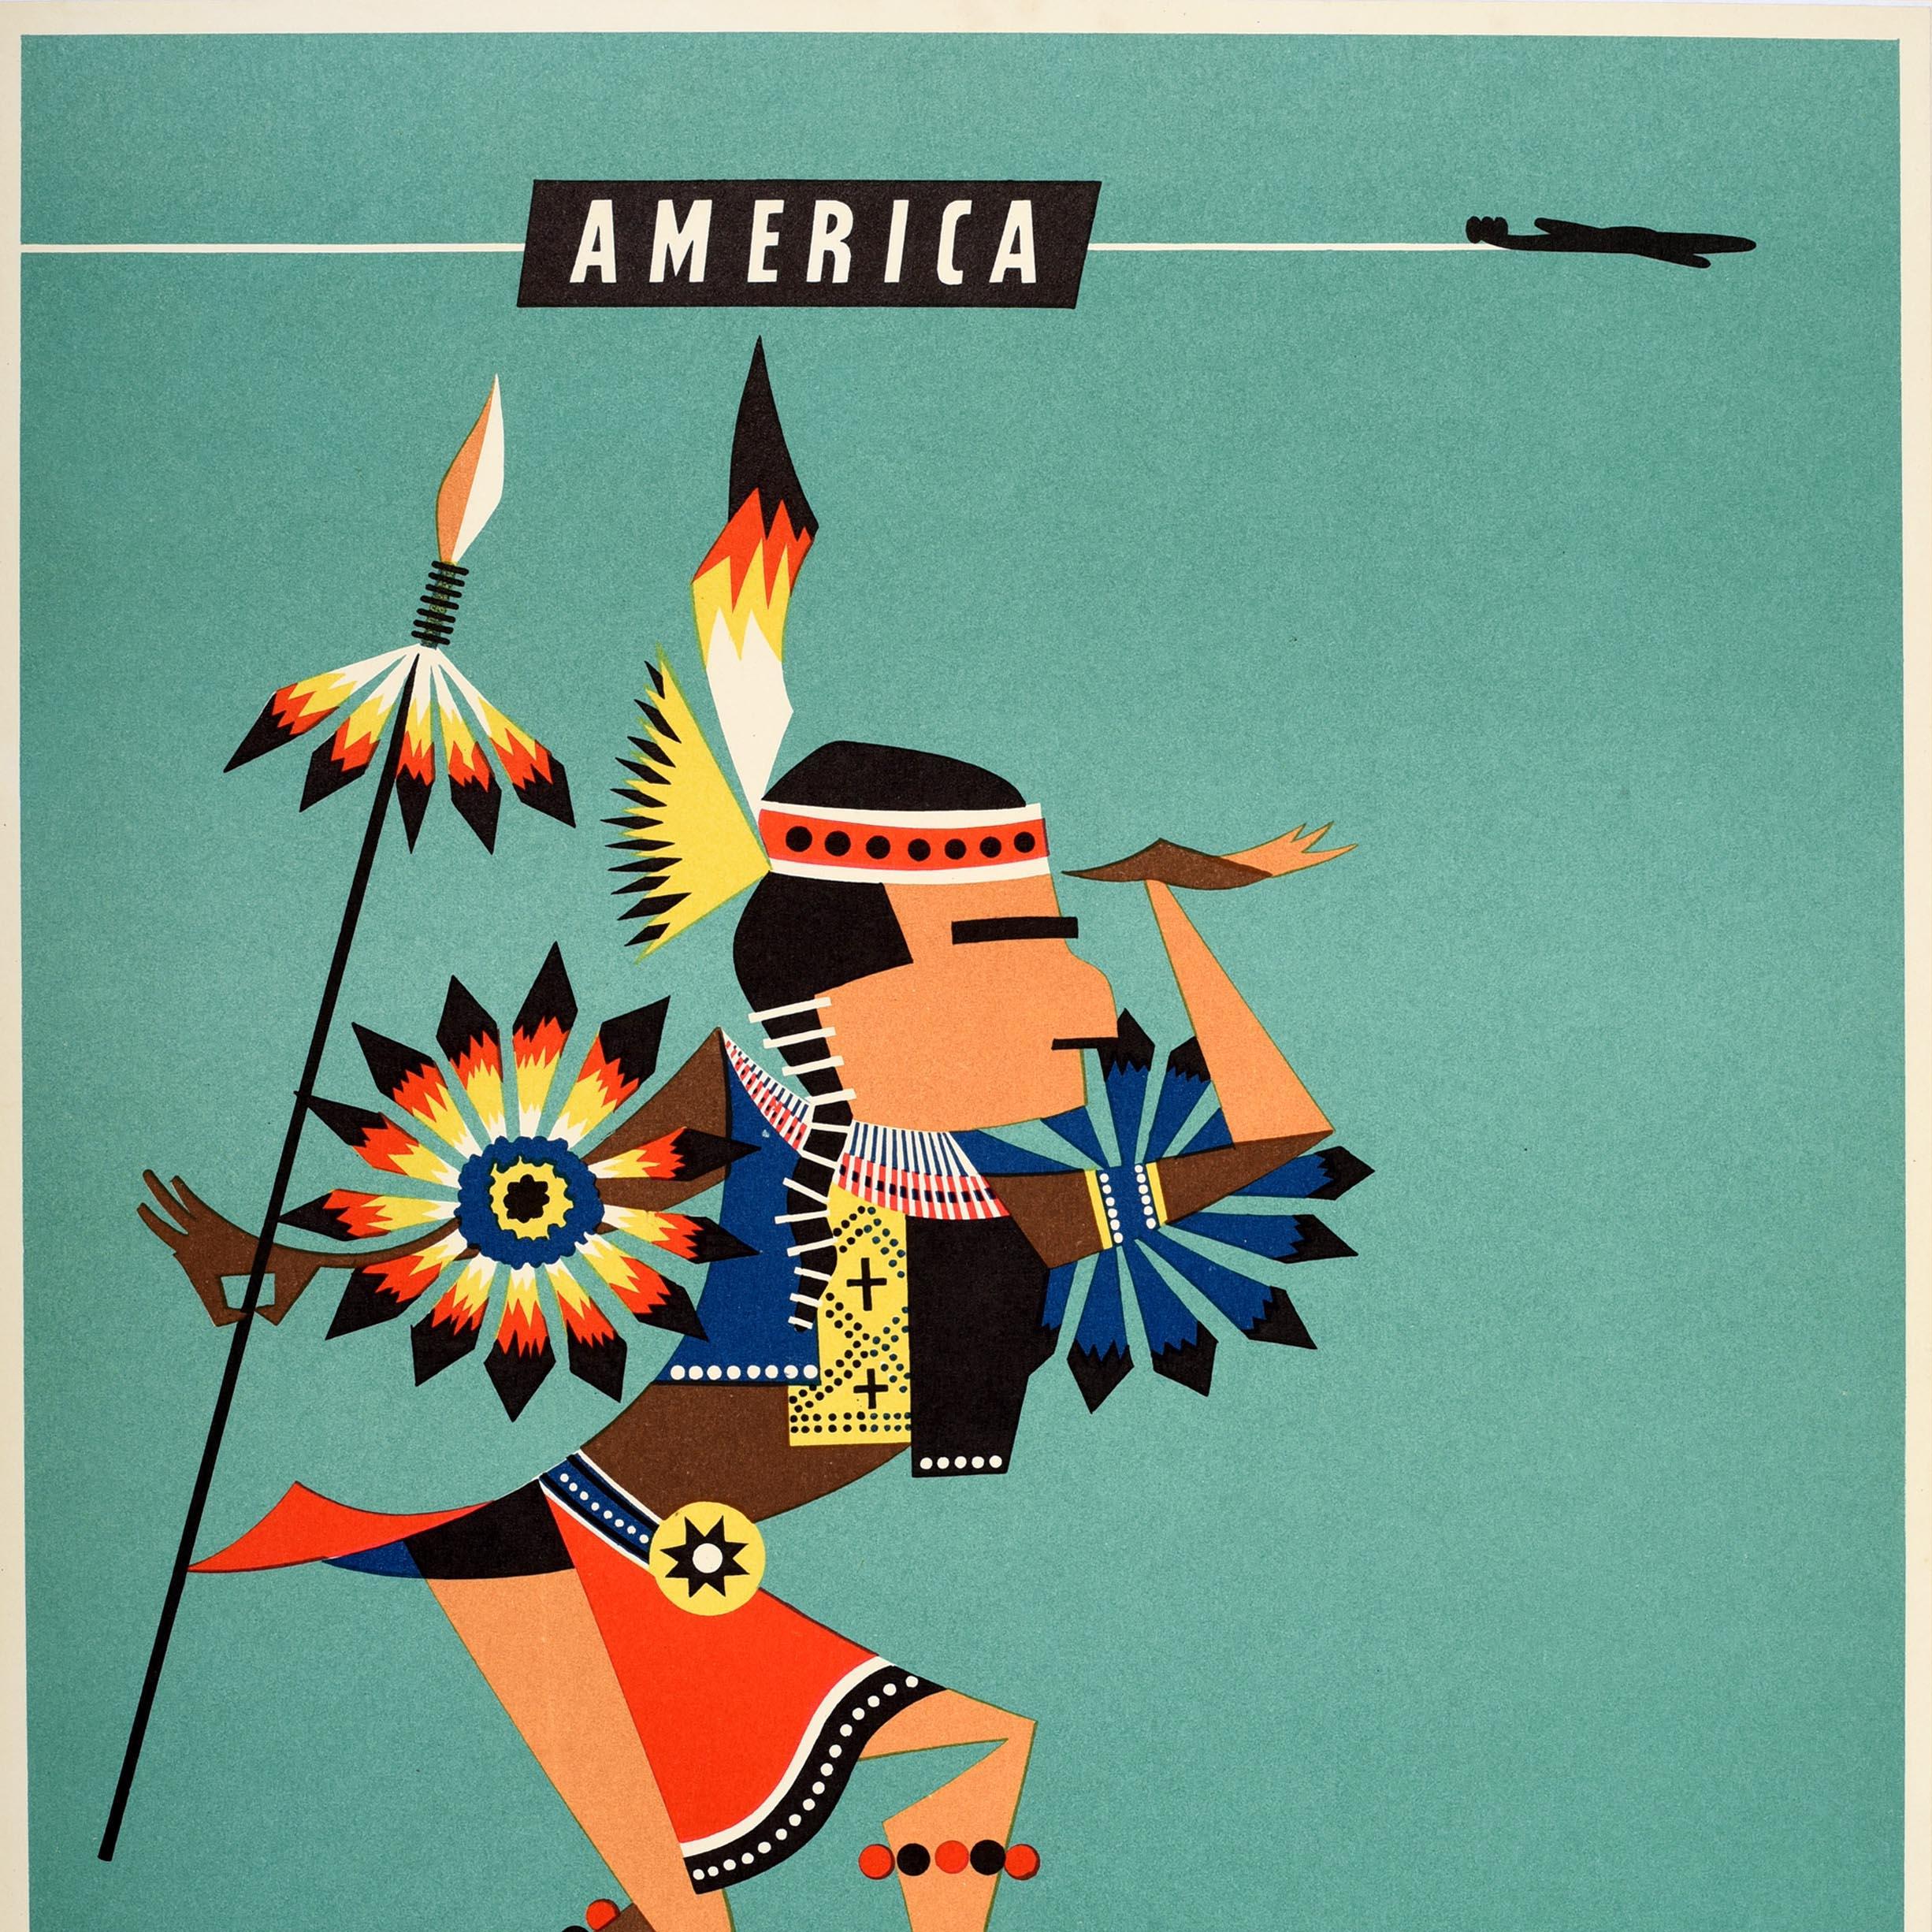 Original vintage travel poster for America issued by Qantas Australia's Overseas Airline in association with BOAC (British Overseas Airways Corporation), TEAL (Tasman Empire Airways Limited) and SAA (South African Airways) featuring a fun and